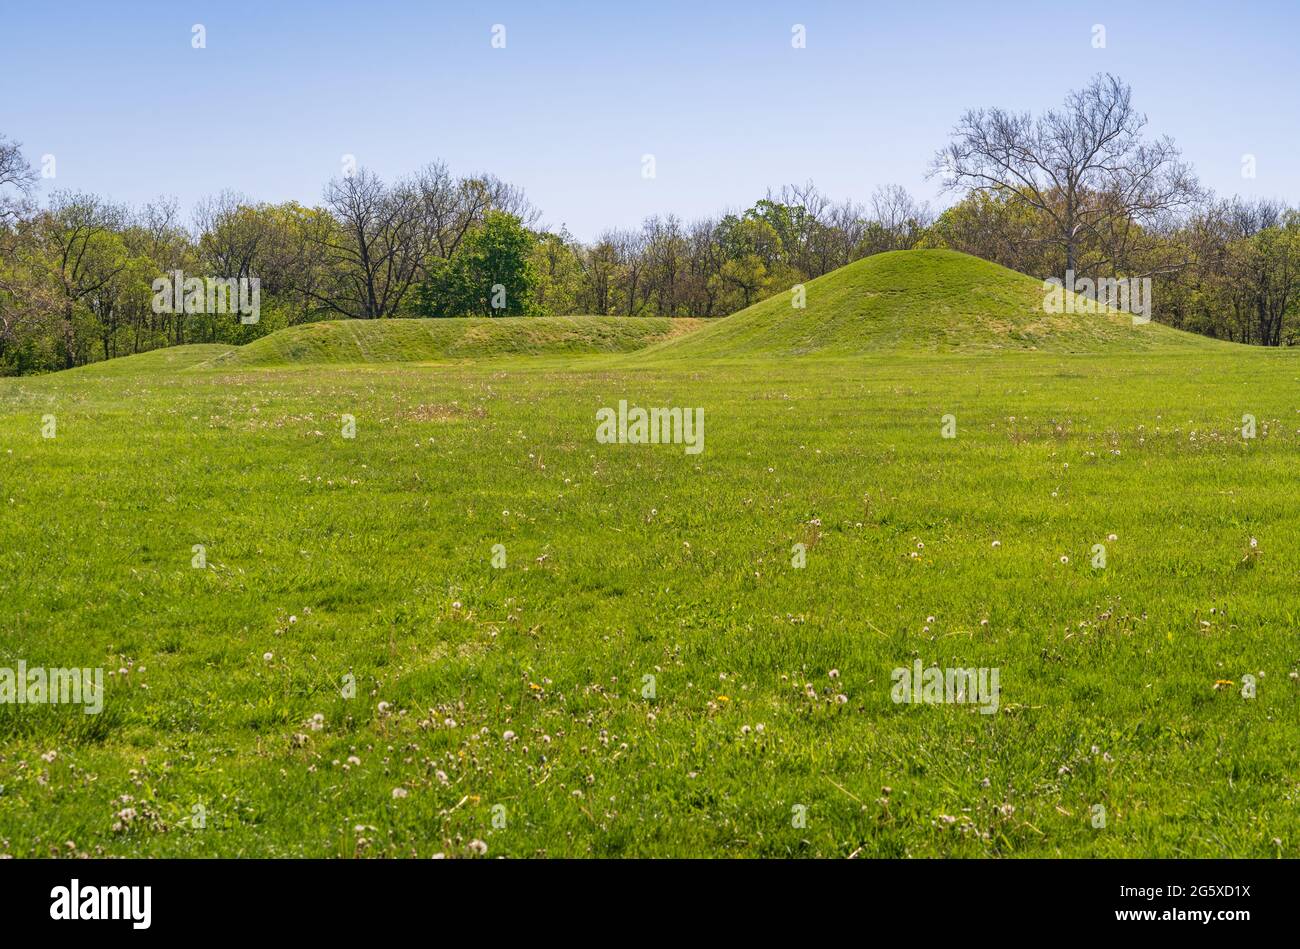 Hopewell Culture National Historical Park Foto Stock